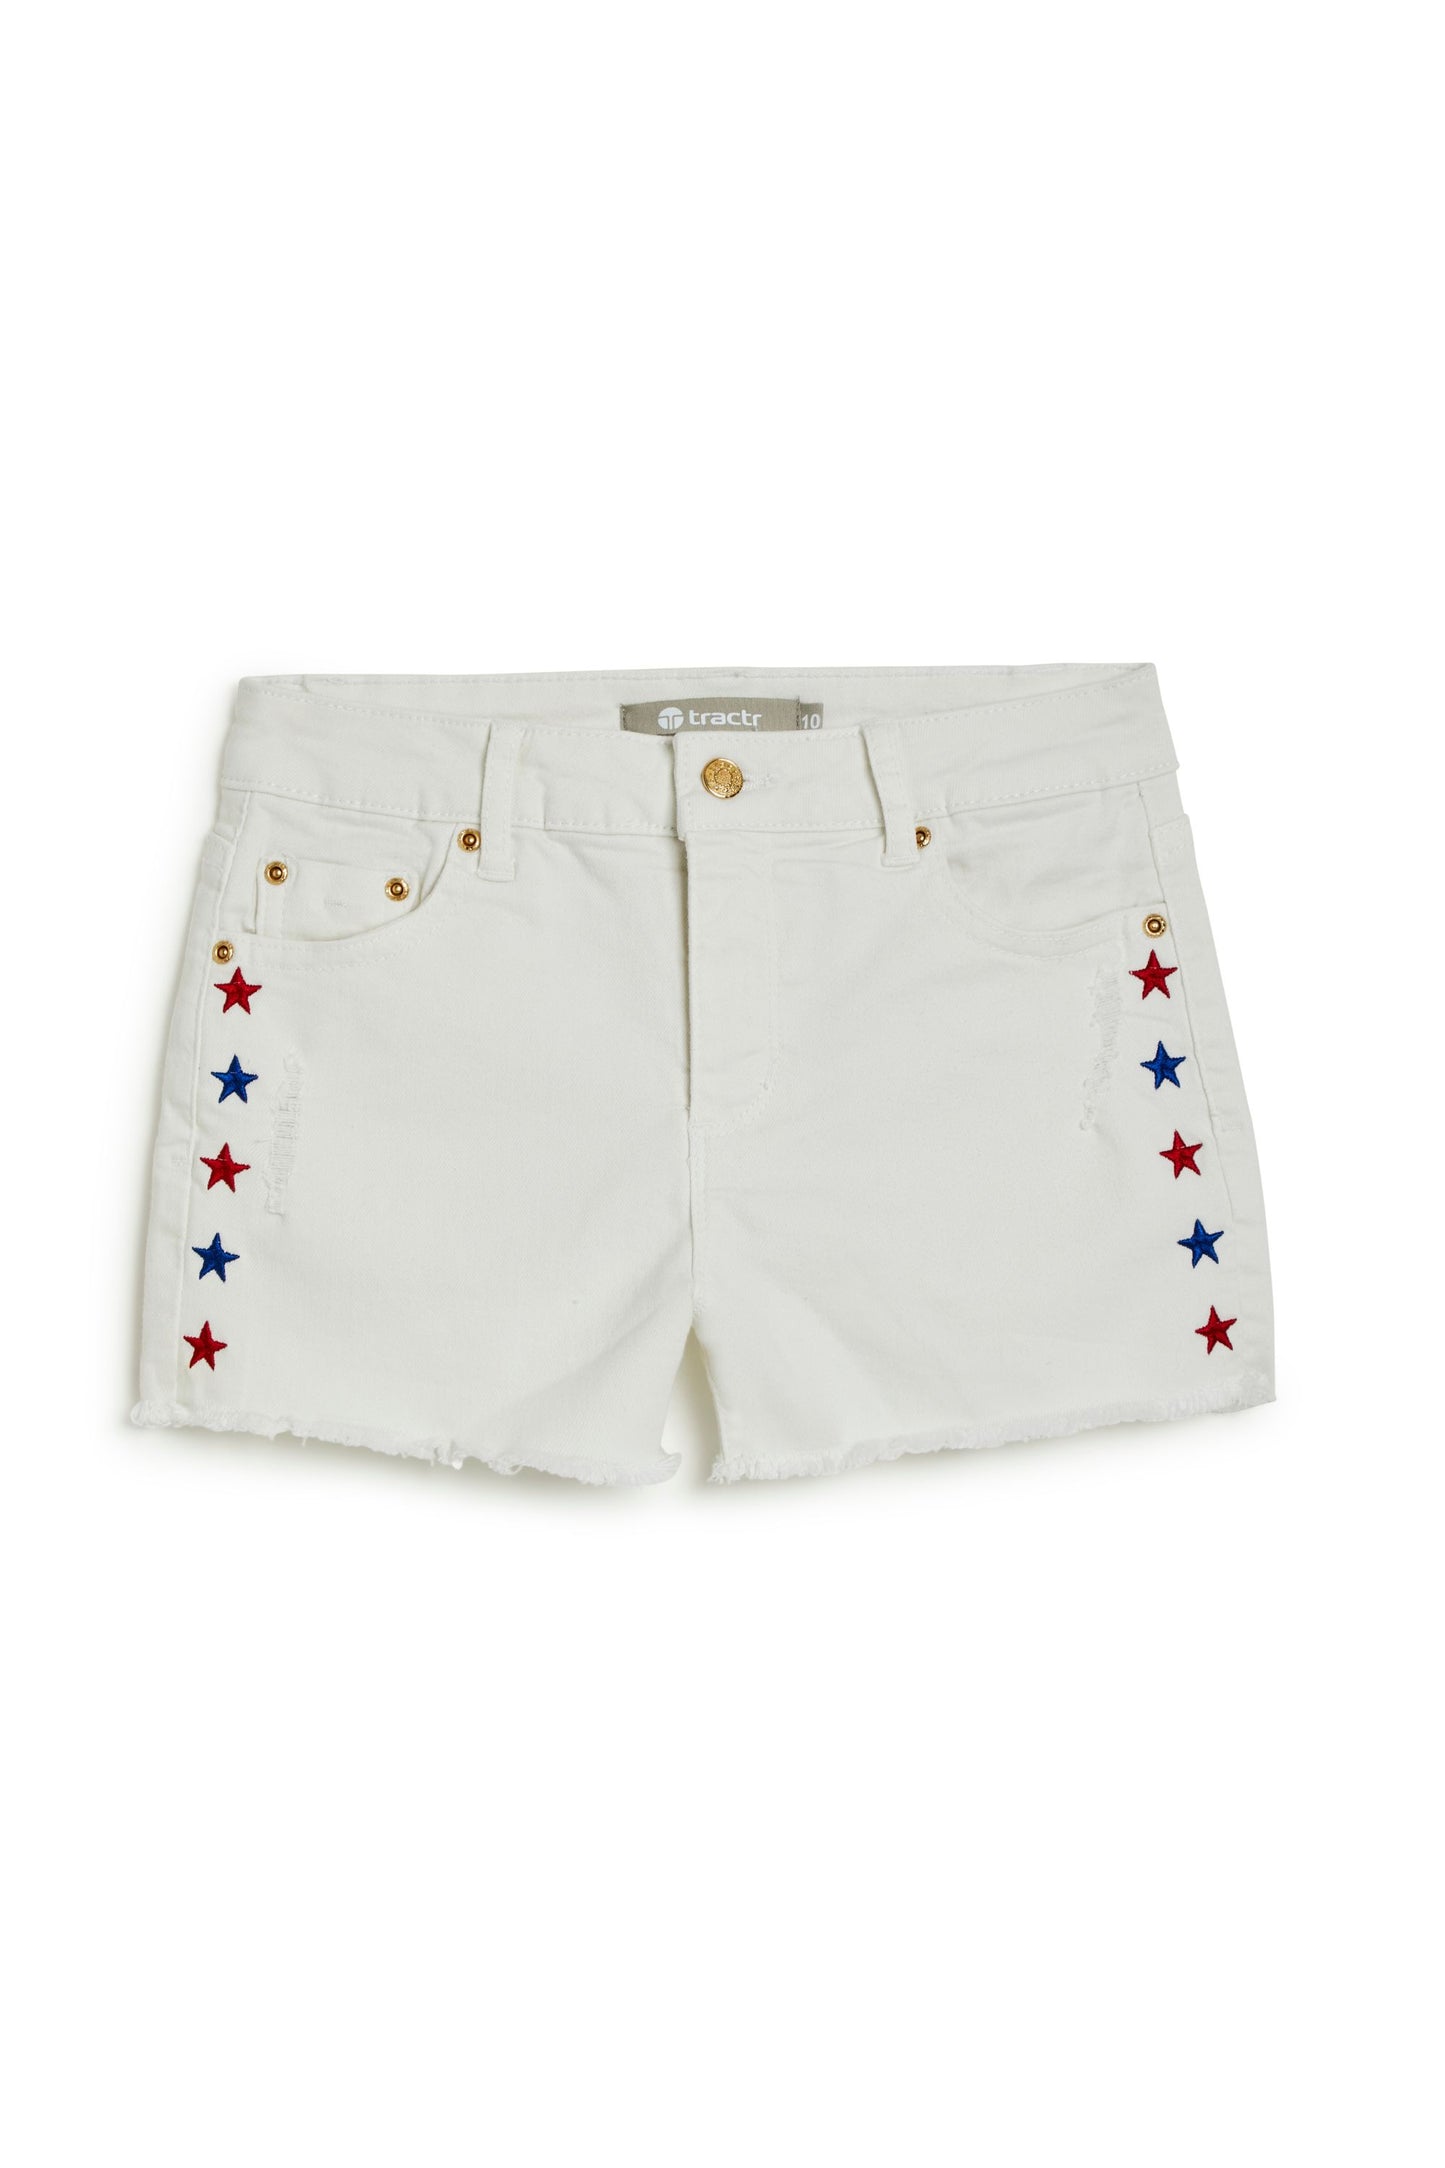 Brittany - Usa Star Print Embroidery Short With Fray Hem